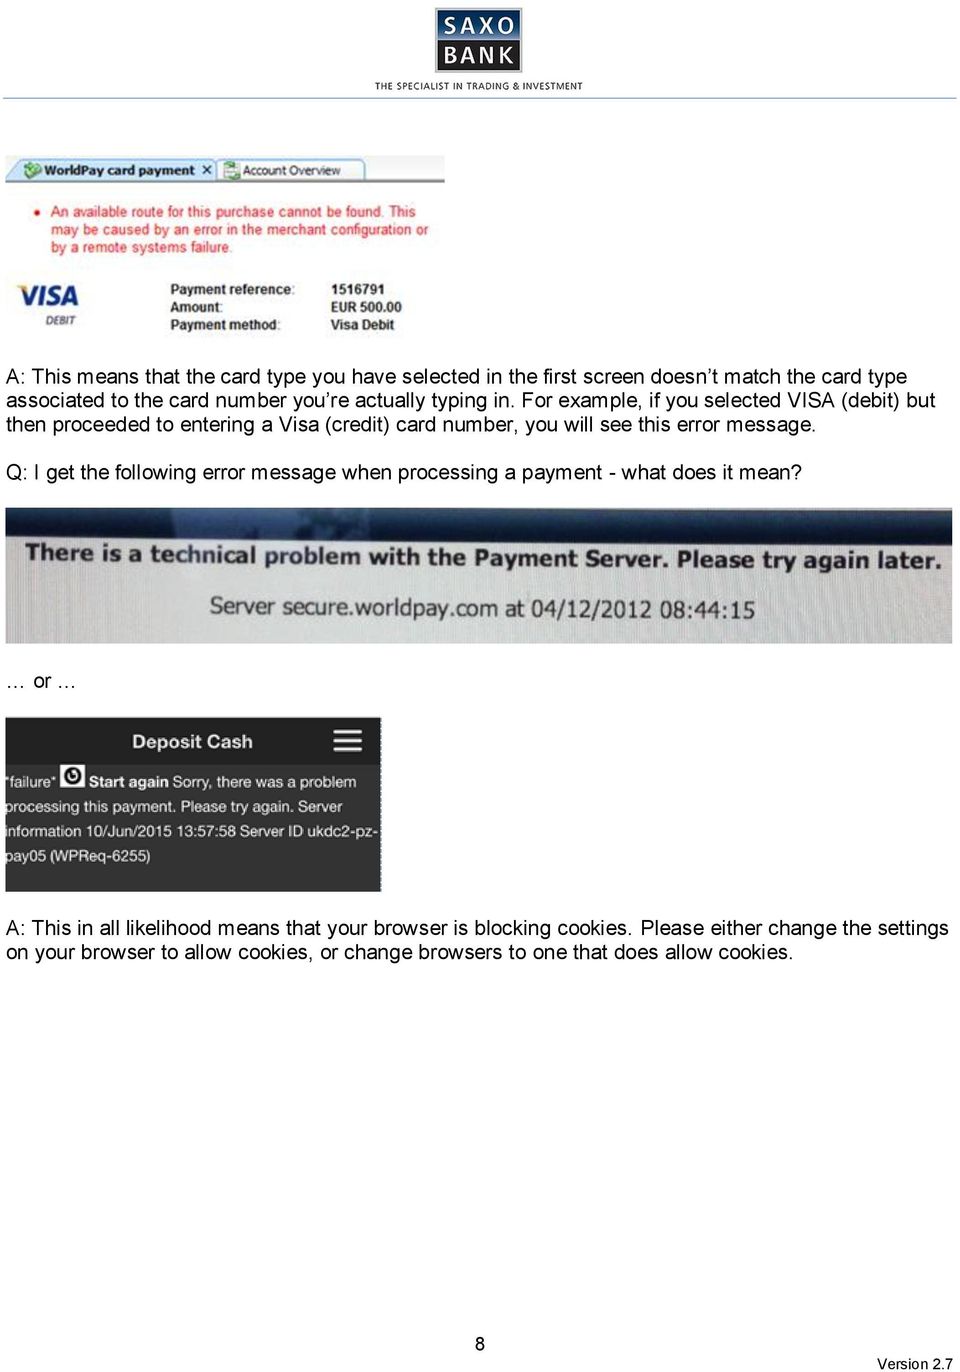 For example, if you selected VISA (debit) but then proceeded to entering a Visa (credit) card number, you will see this error message.